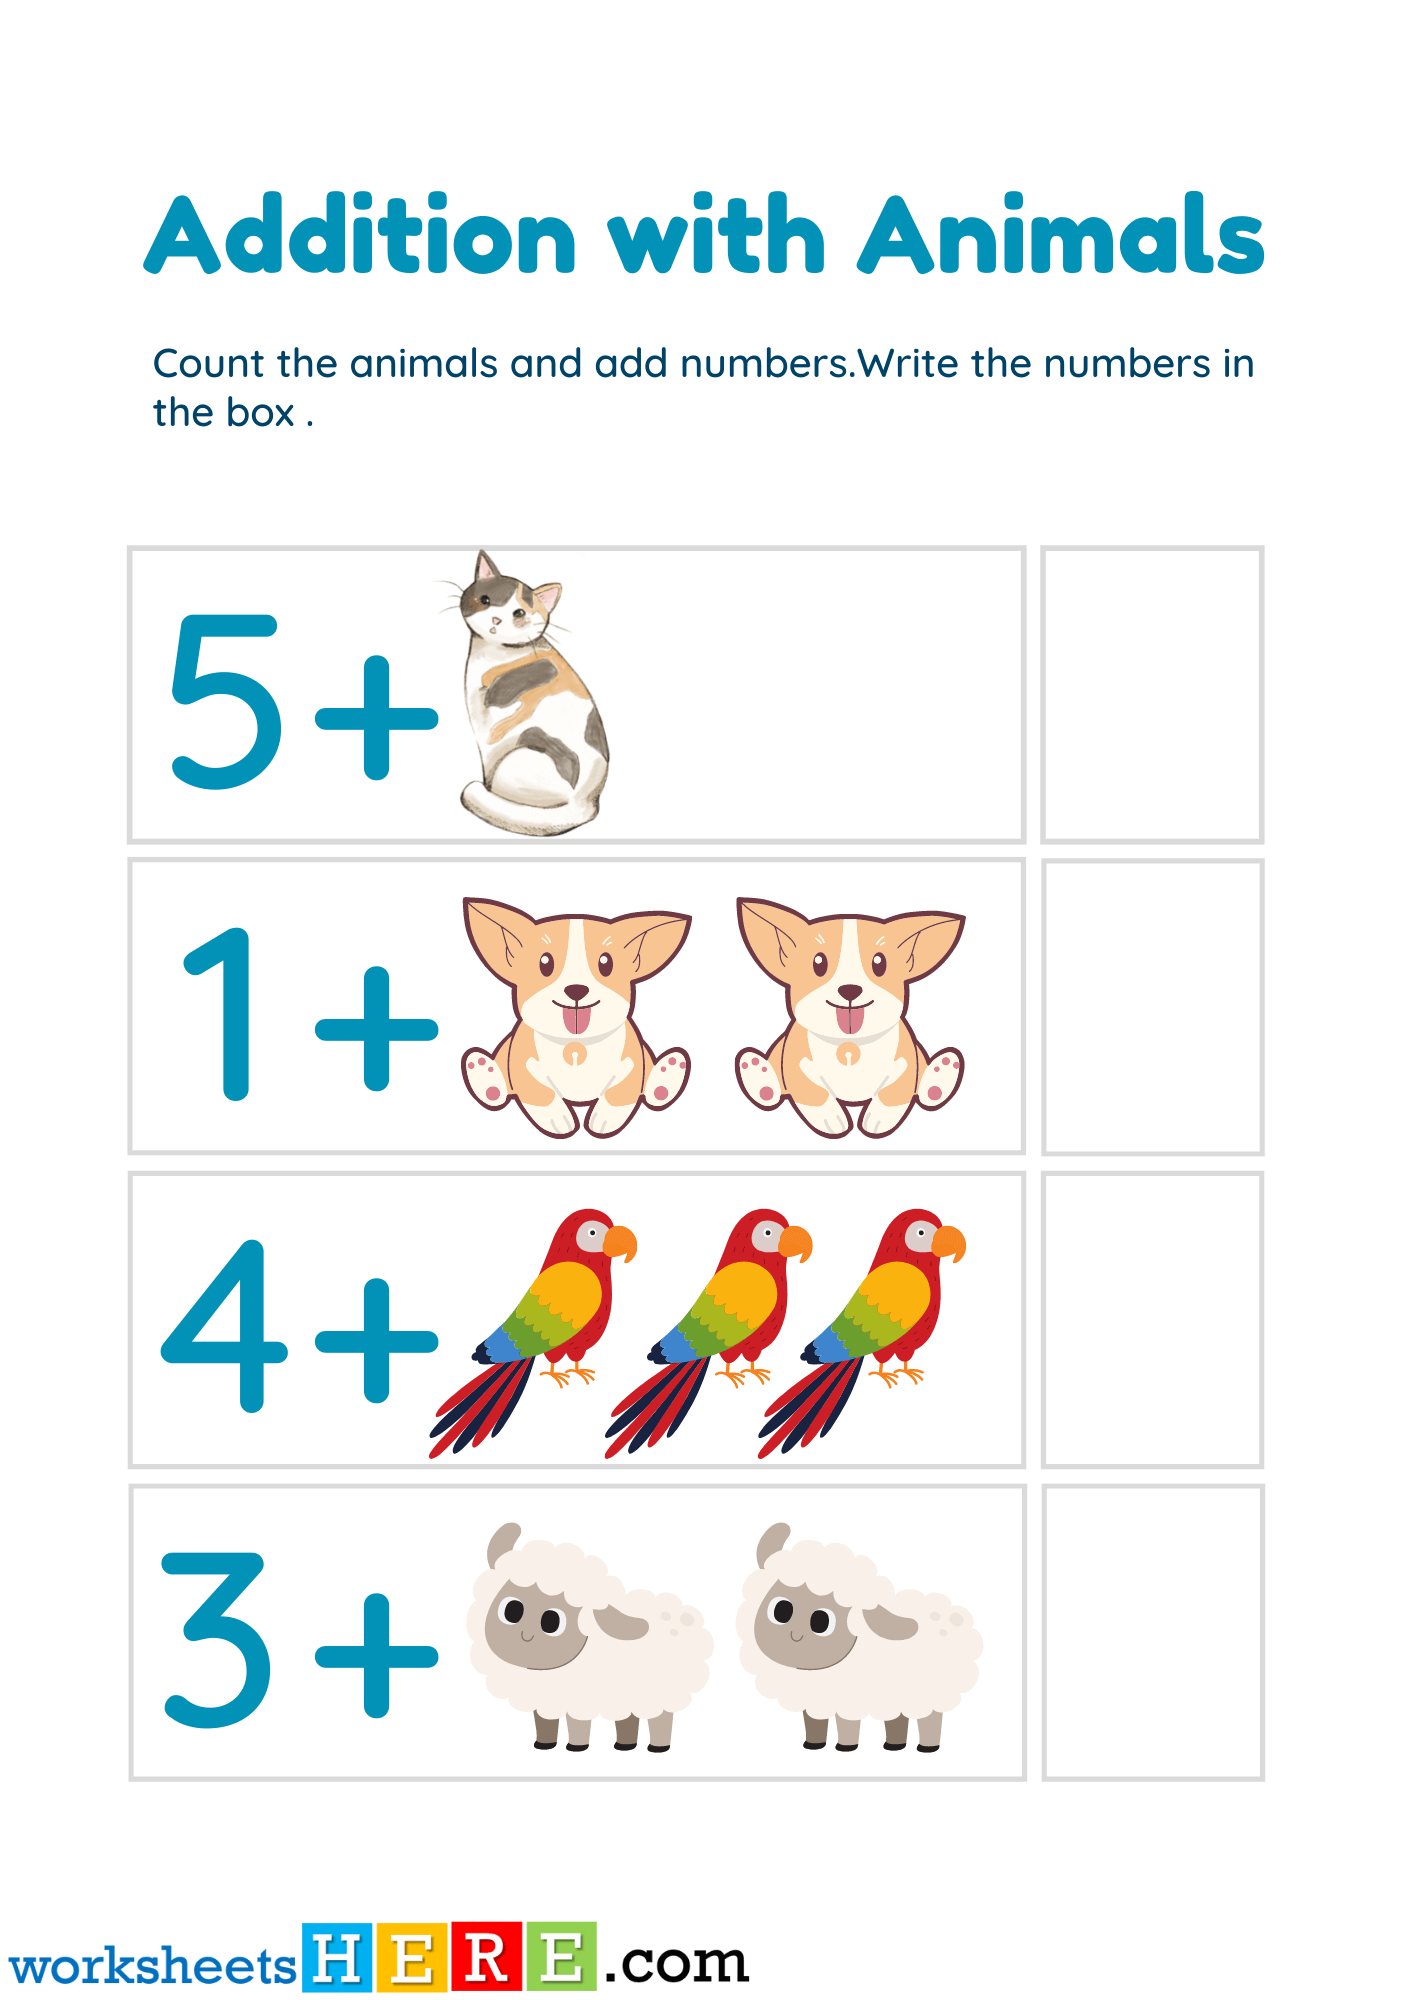 Count and Addition with Animals Exercises PDF Worksheet For Kids